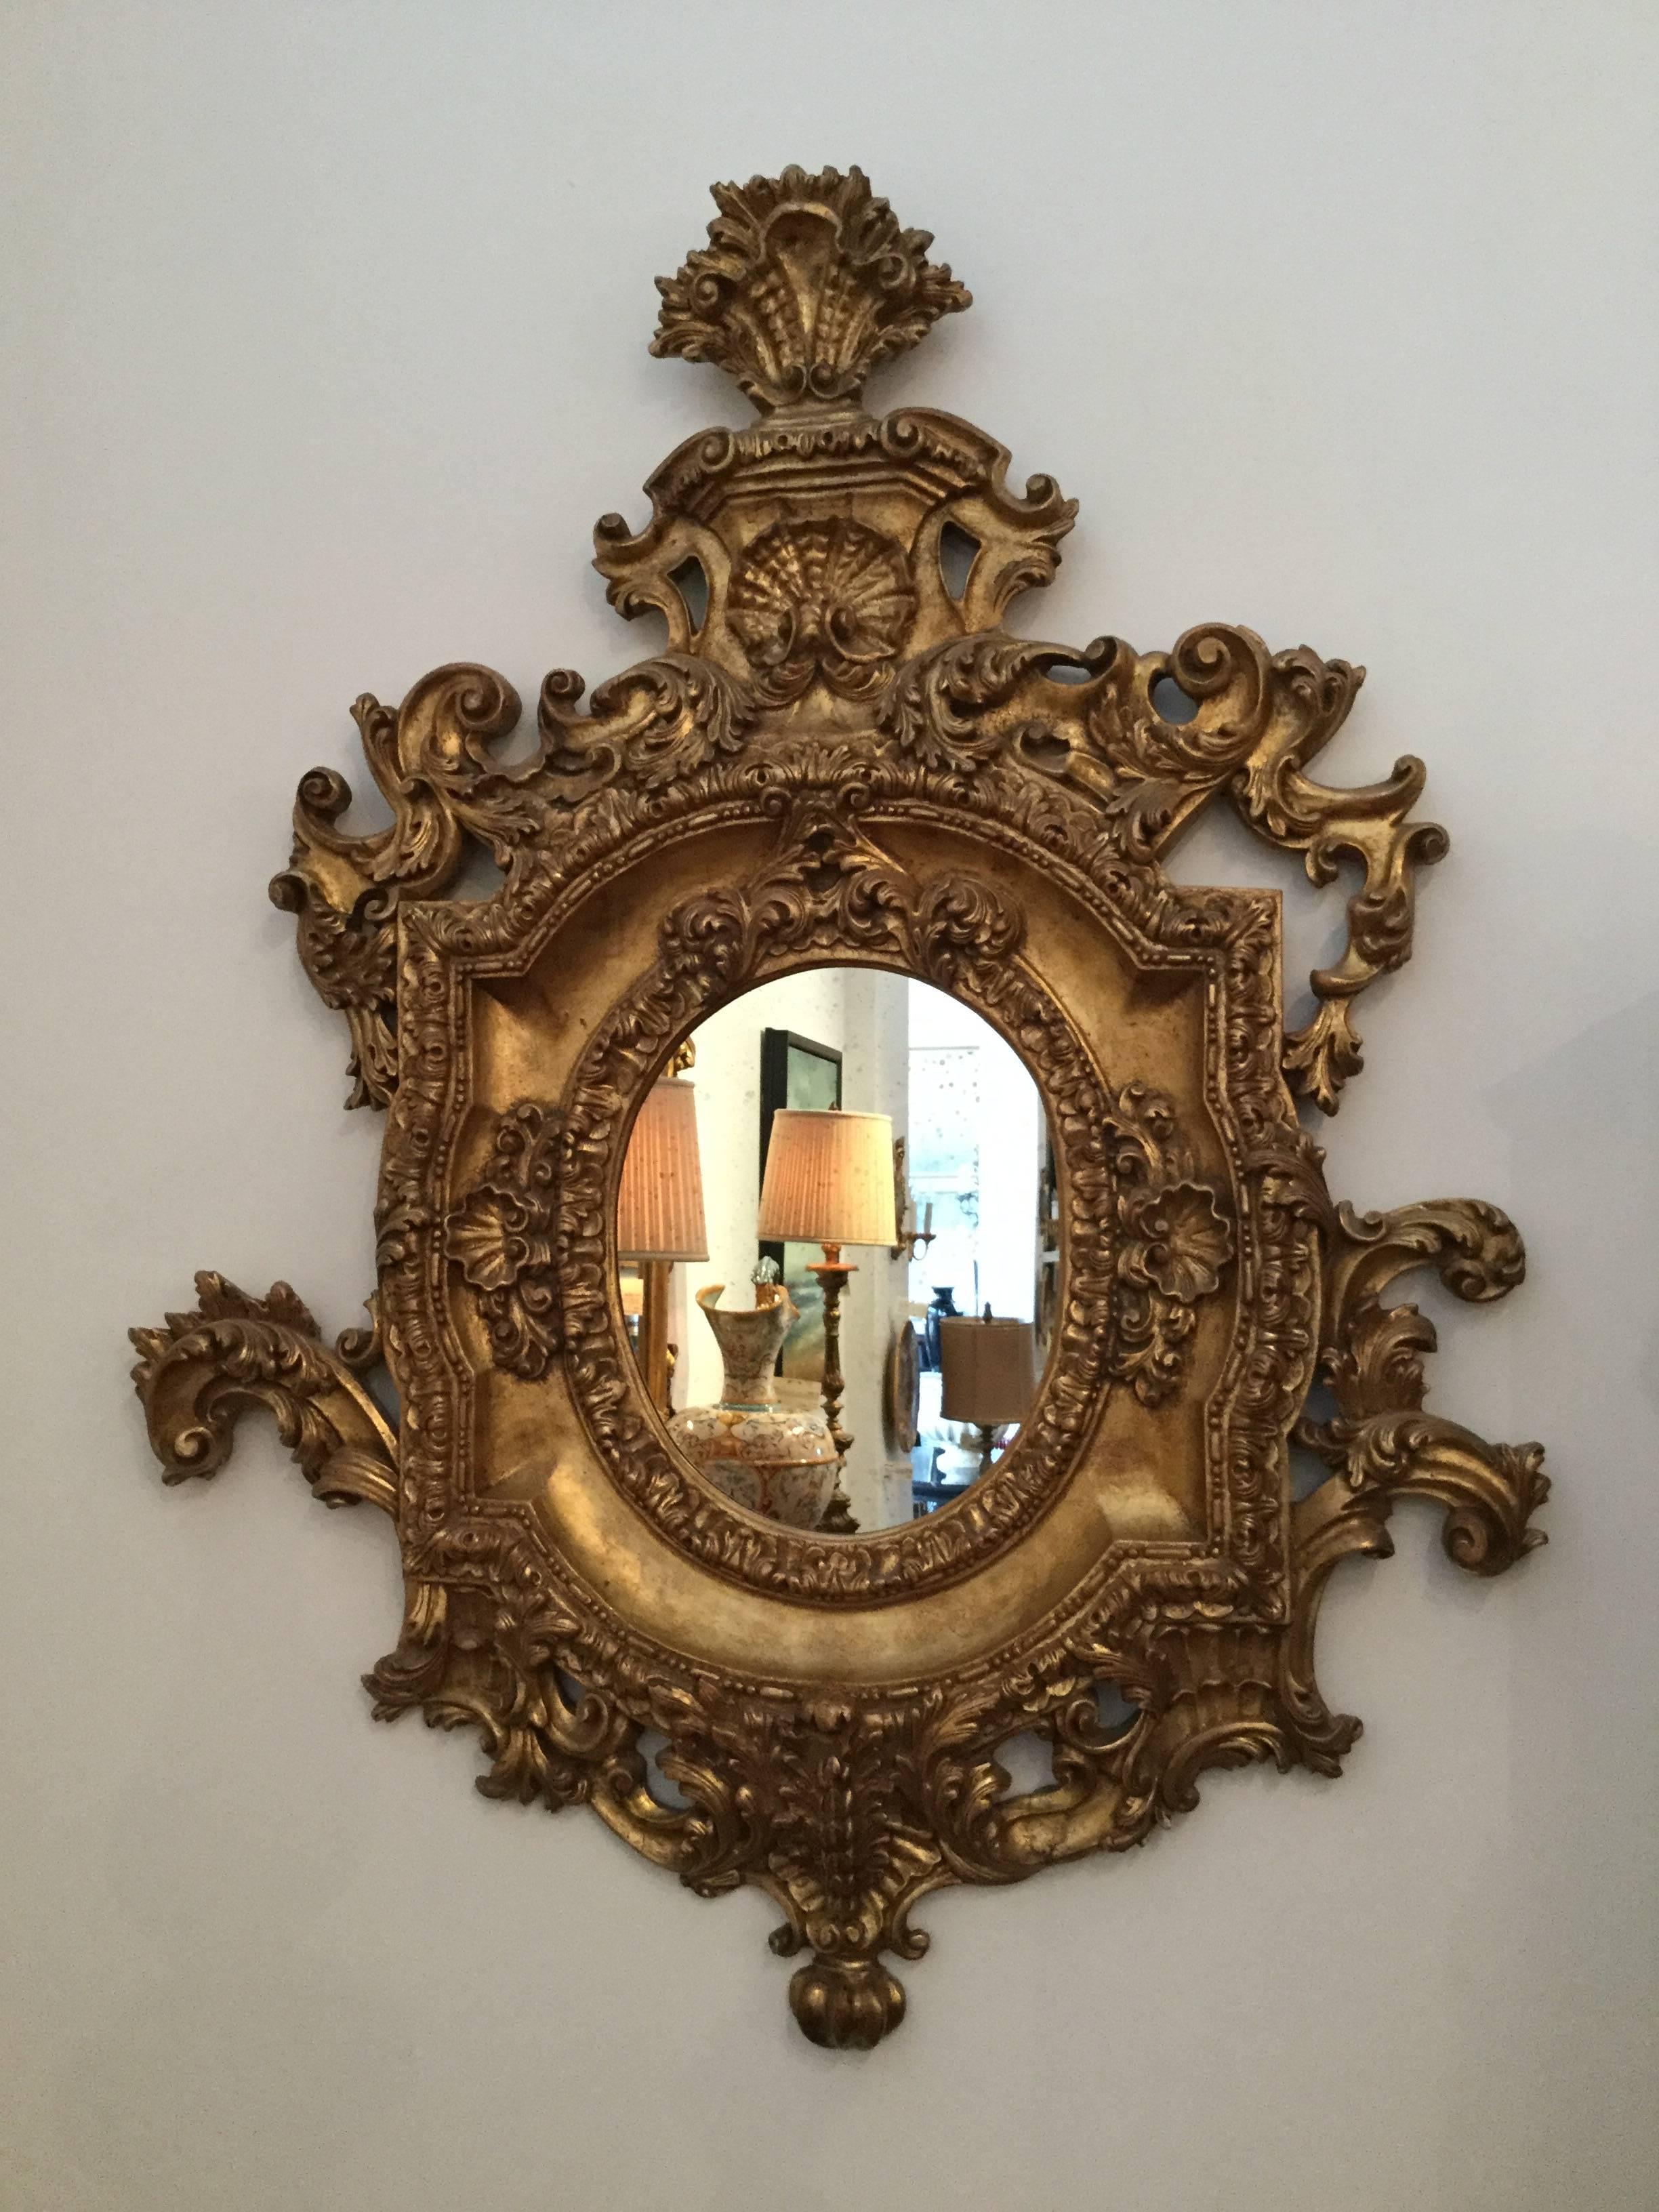 Hand-carved wood ornate mirror frame in an aged gold leaf finish with shell and plume motif.